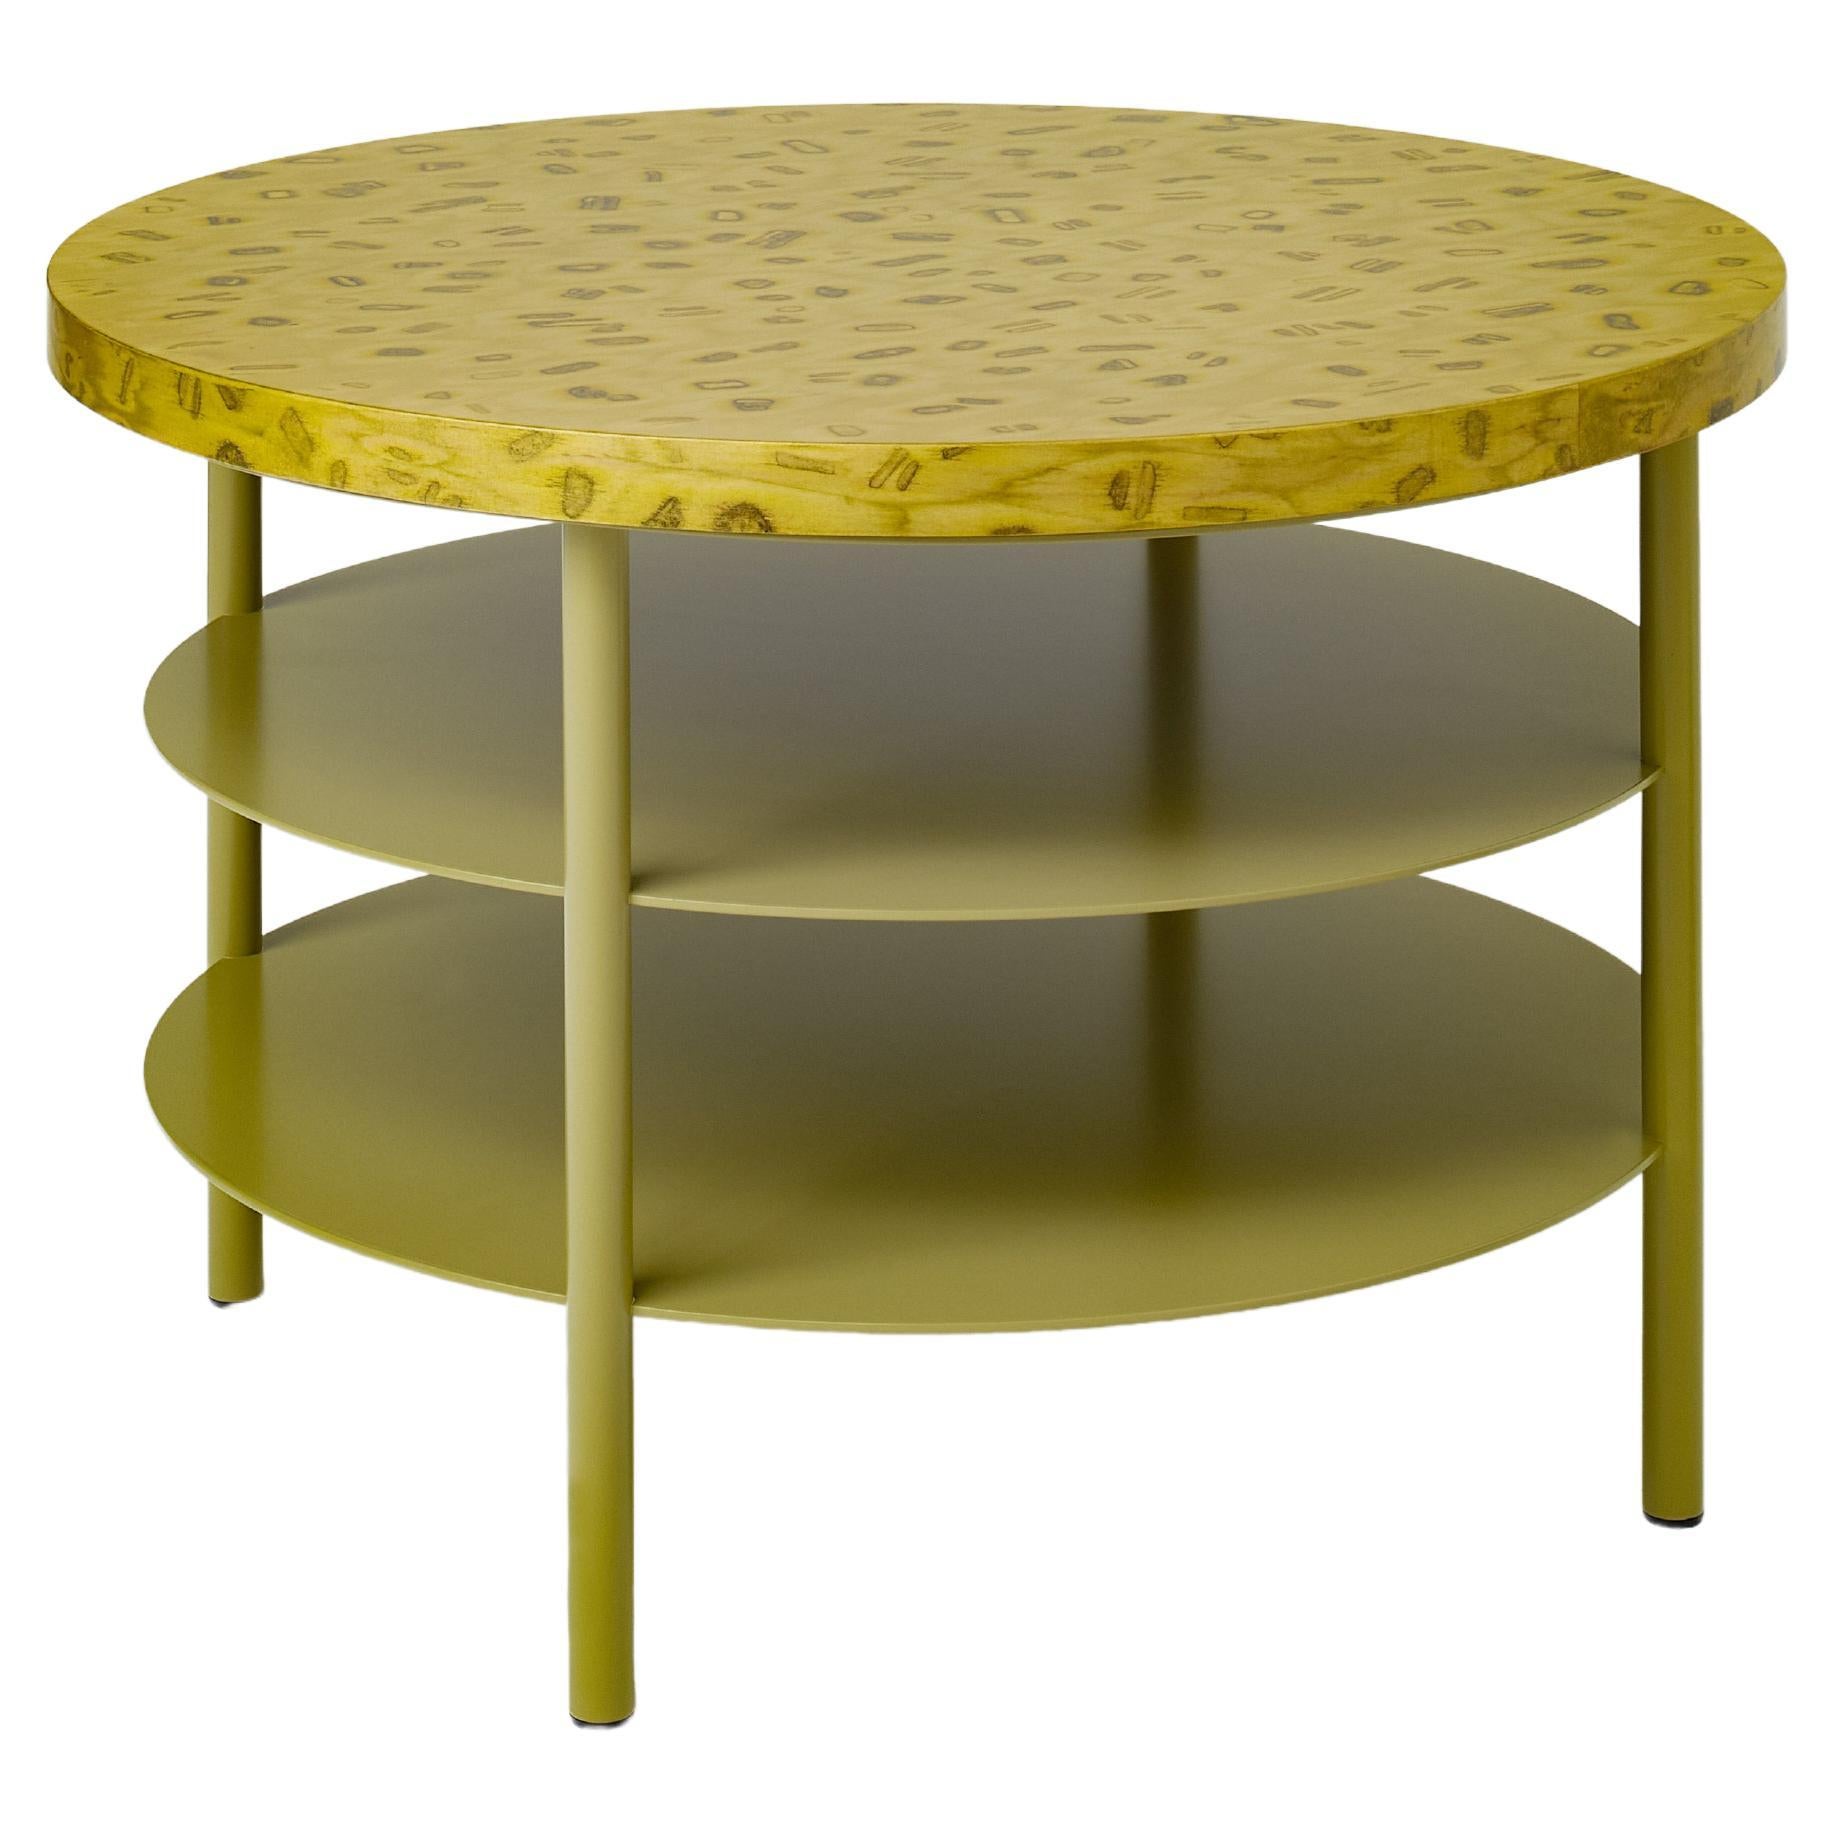 Tiered Yellow Coffee Table, Osis Pila Midi by Llot Llov